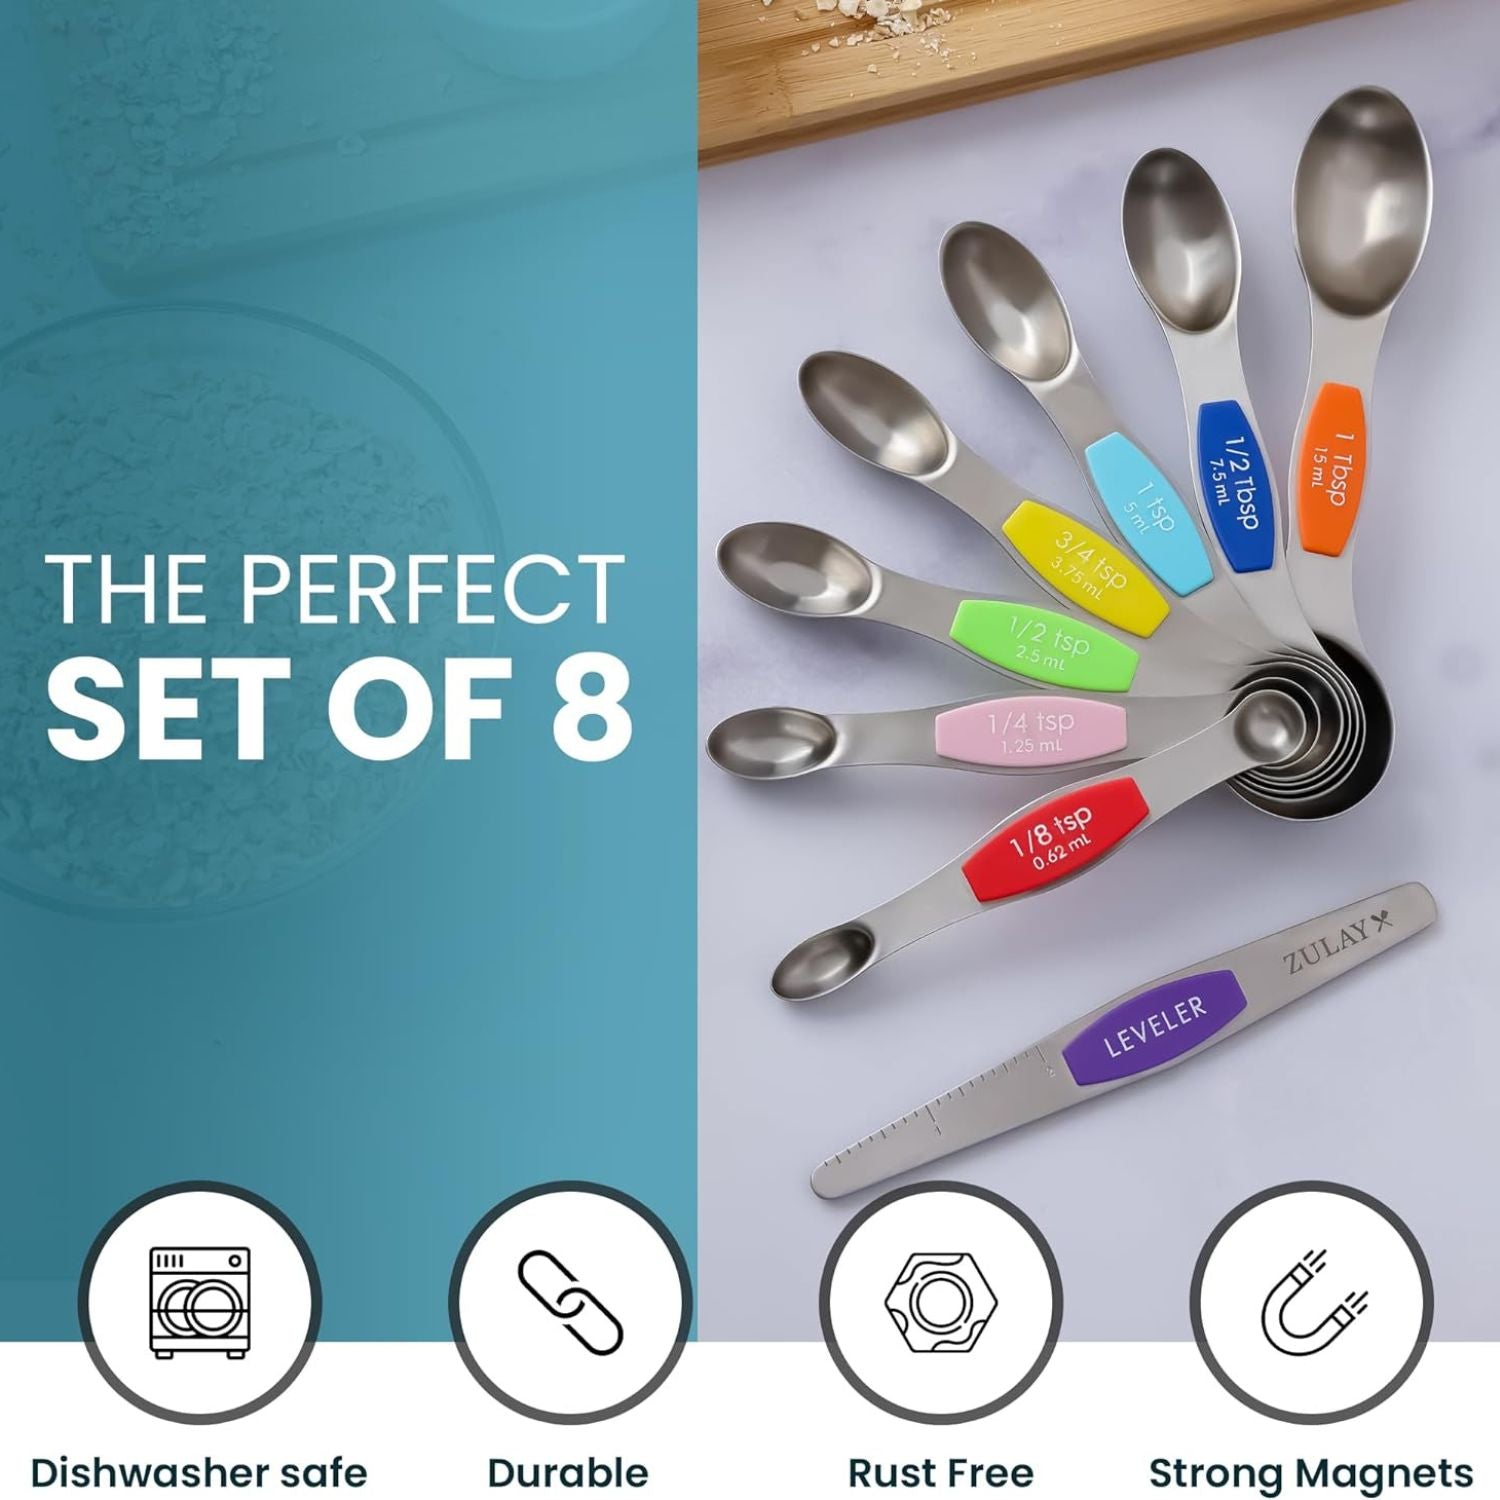 Magnetic Measuring Spoons - Set of 8